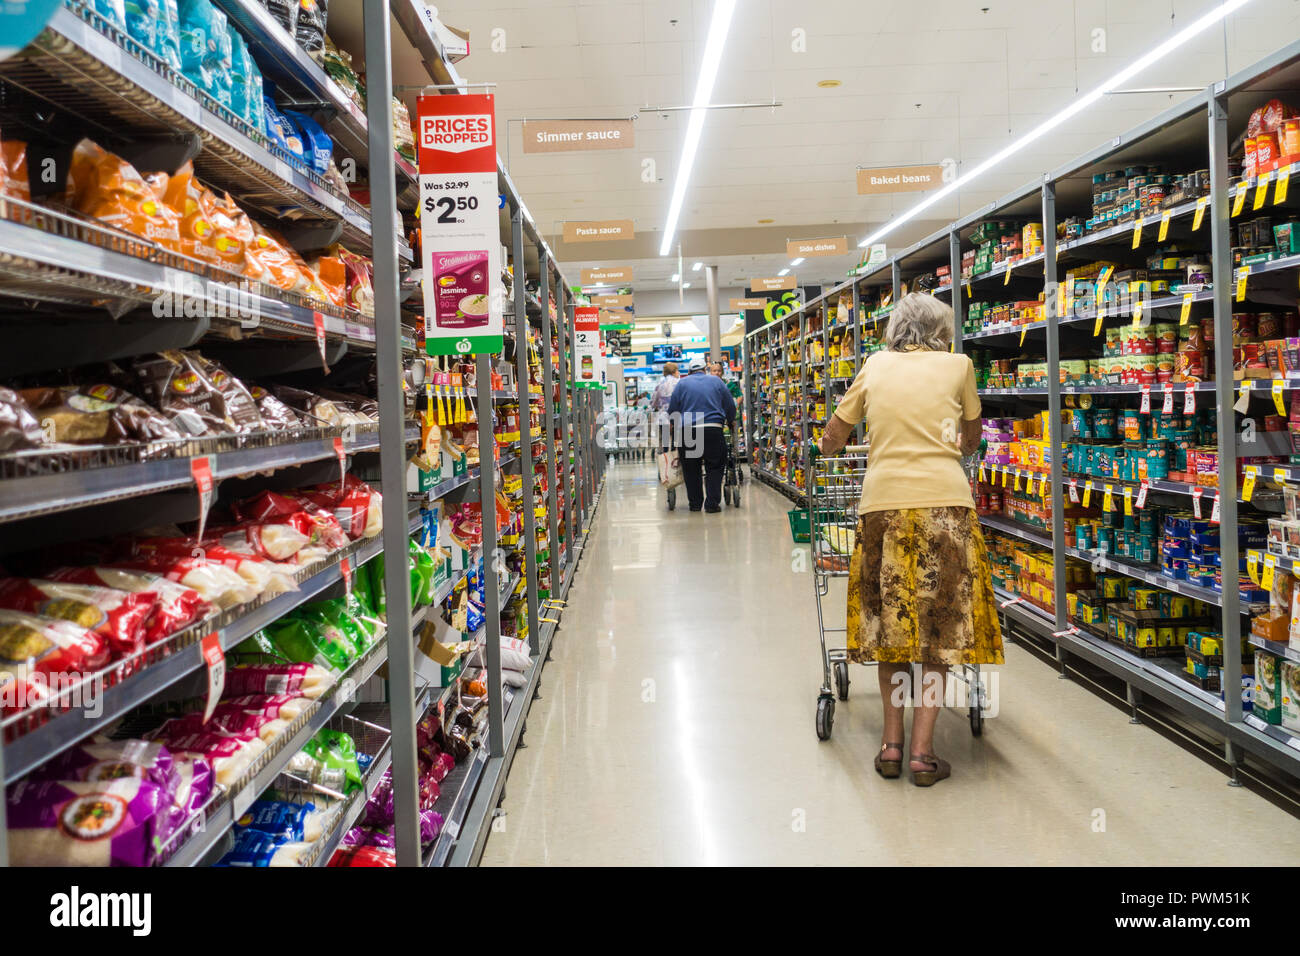 Shoppers pushing trolleys down an aisle at Woolworths supermarket,Tamworth NSW Australia. Stock Photo